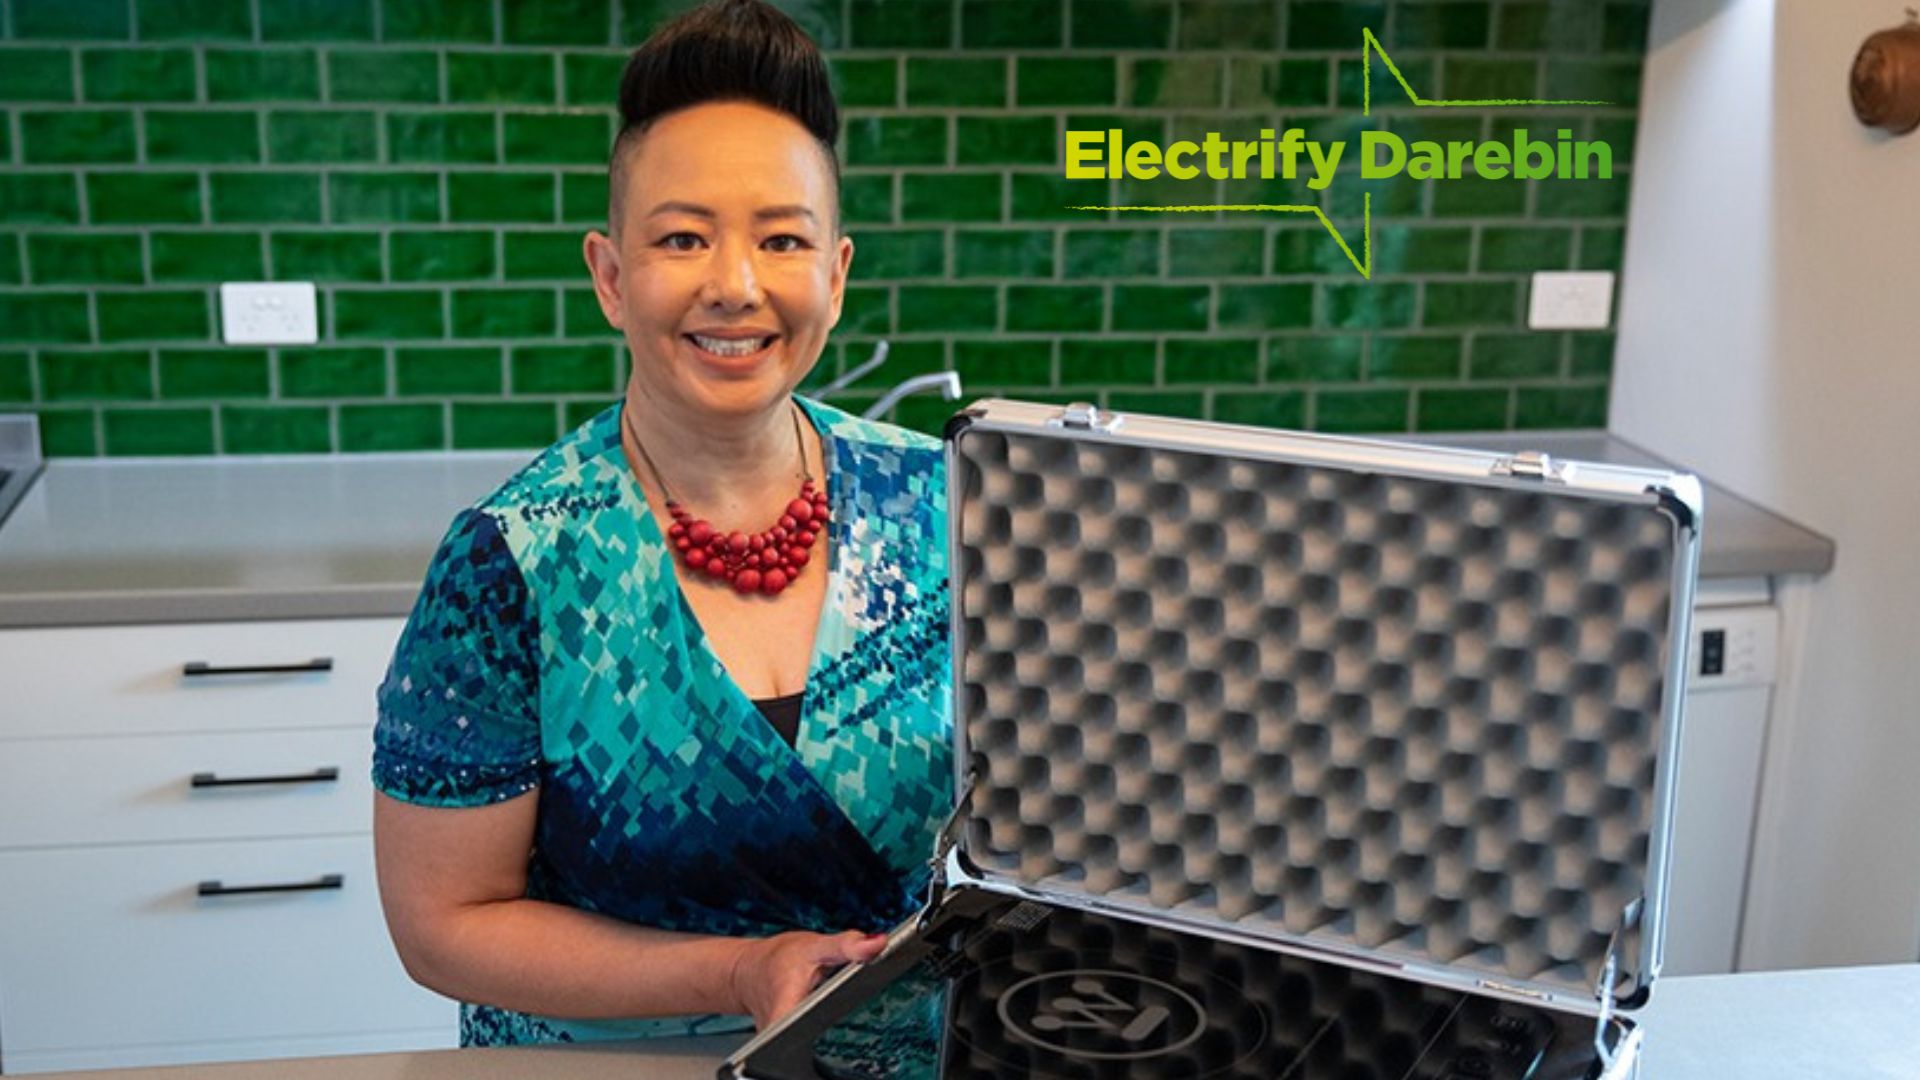 Image: Photo of a smiling person with short dark hair and chunky red necklace standing in a kitchen and holding an open case containing an induction cooktop.